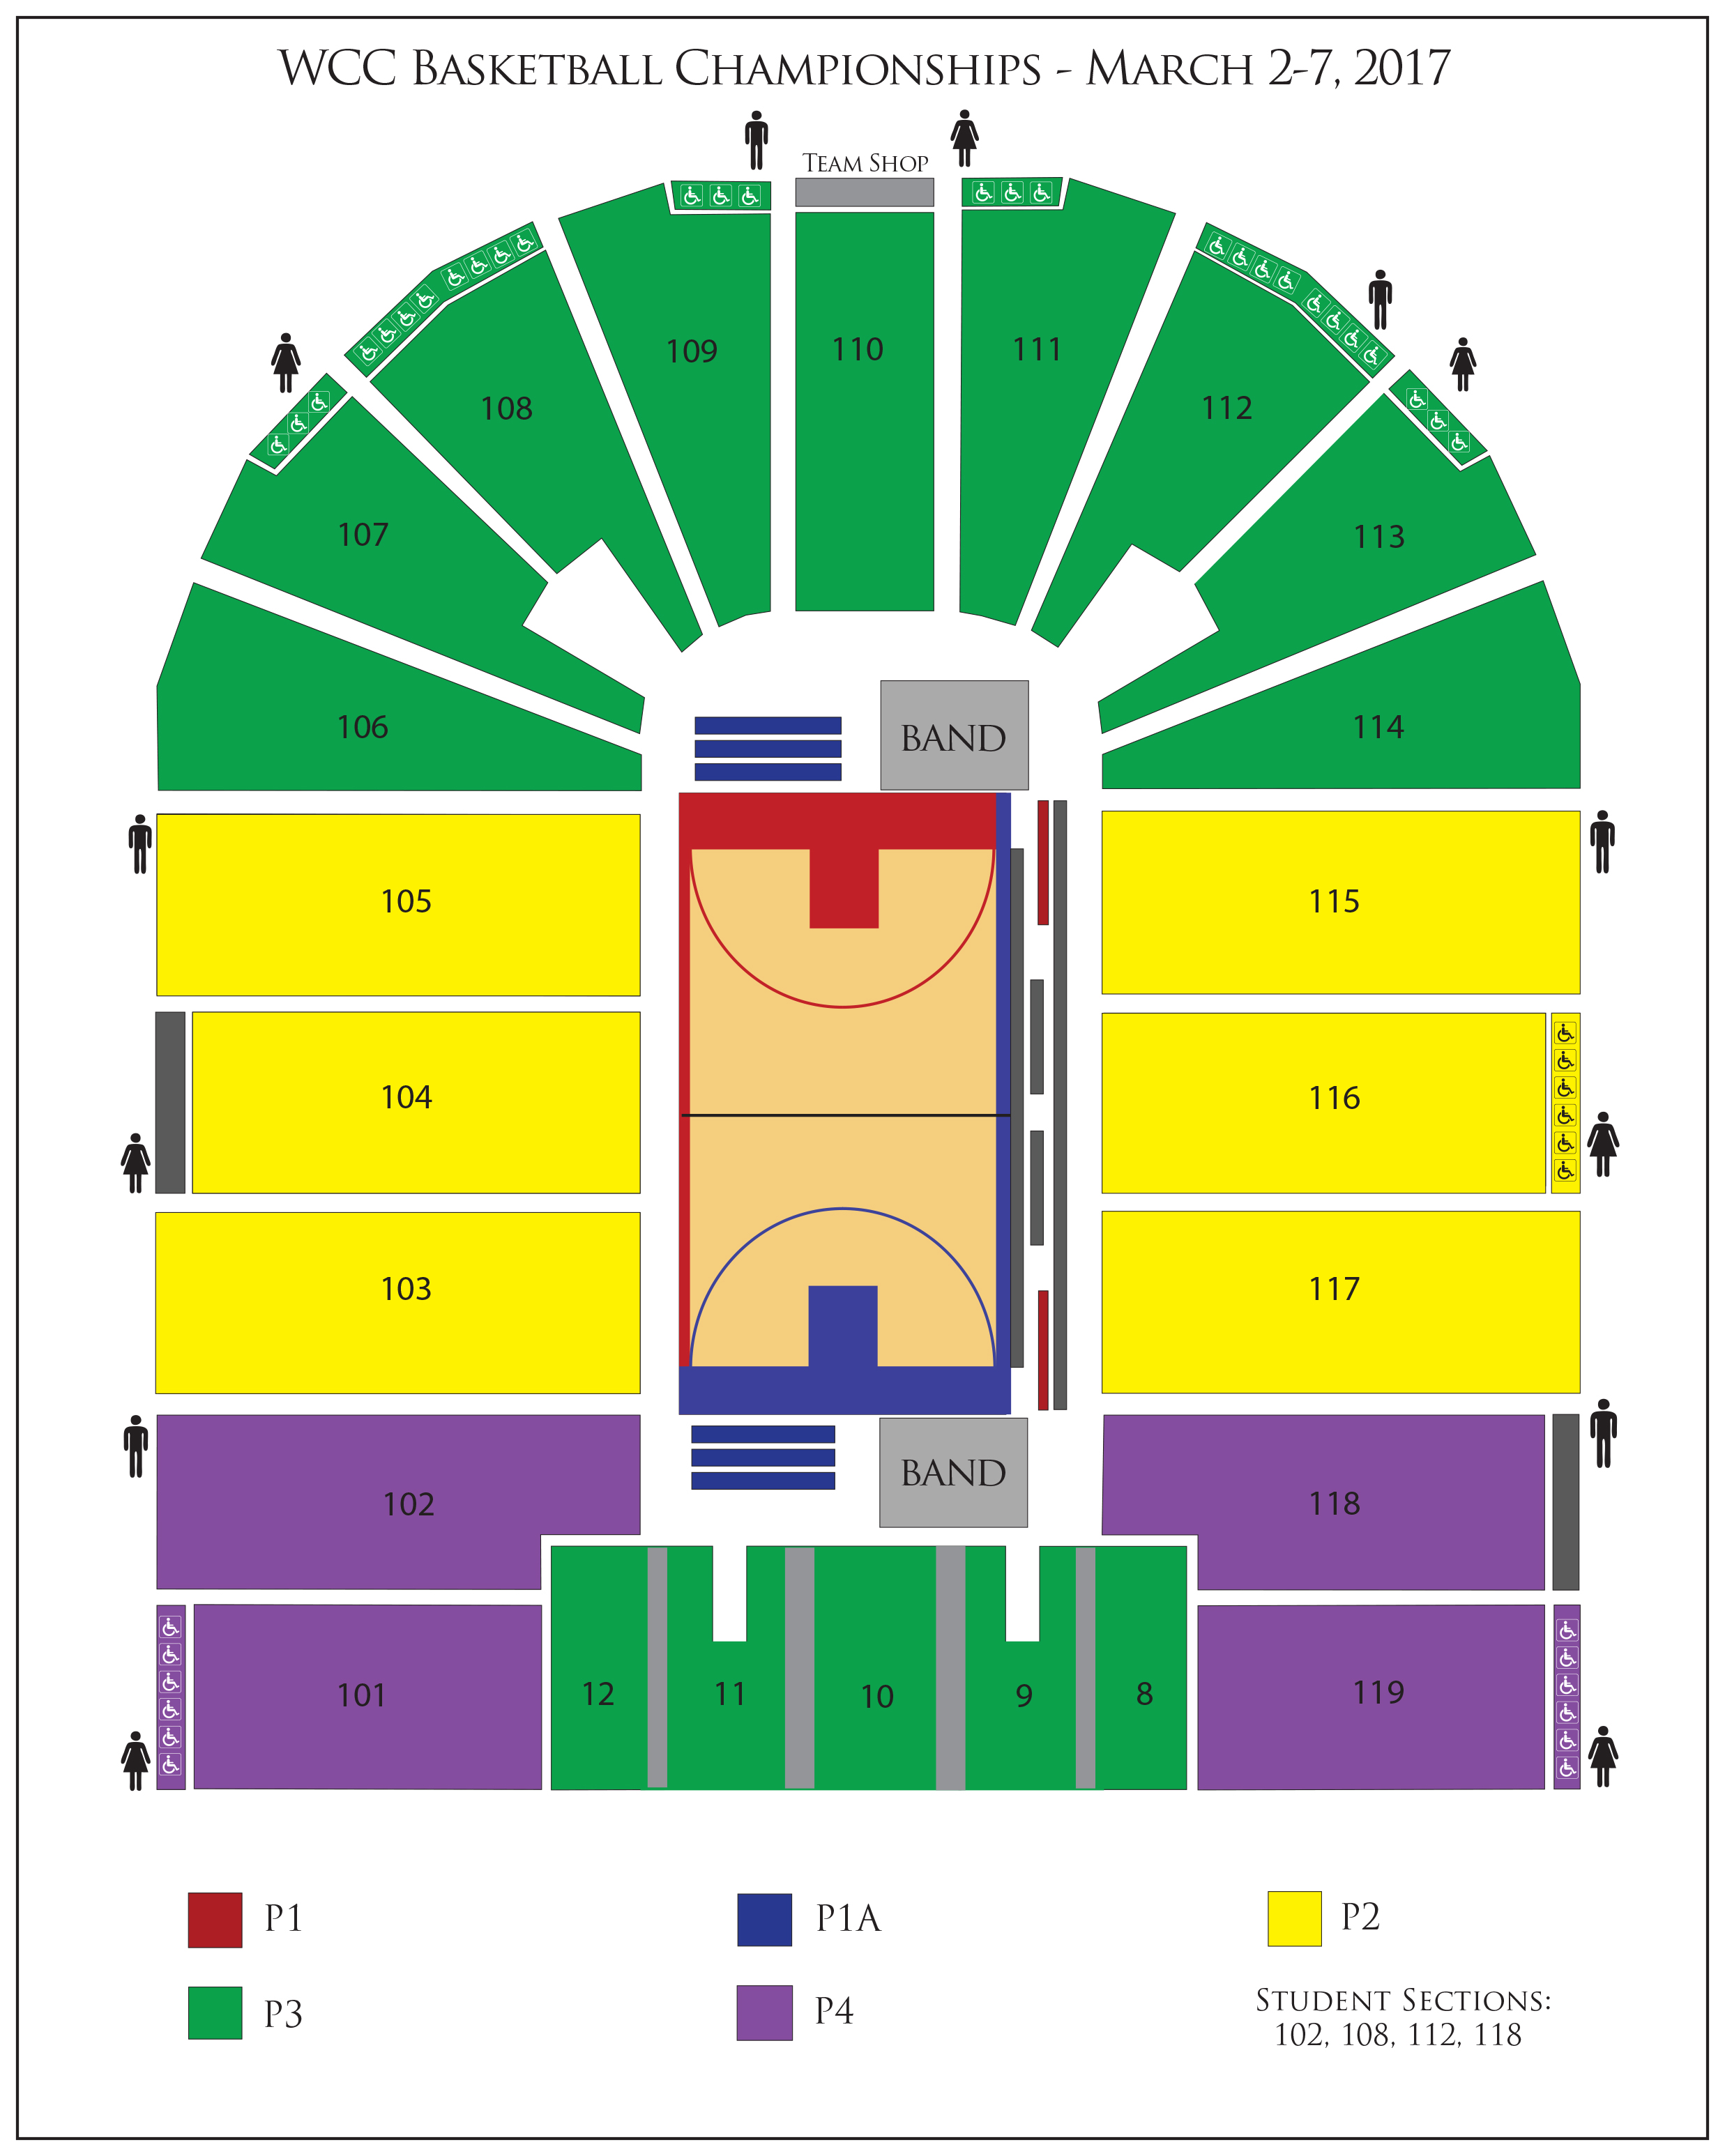 The Orleans Arena Seating Chart Las Vegas